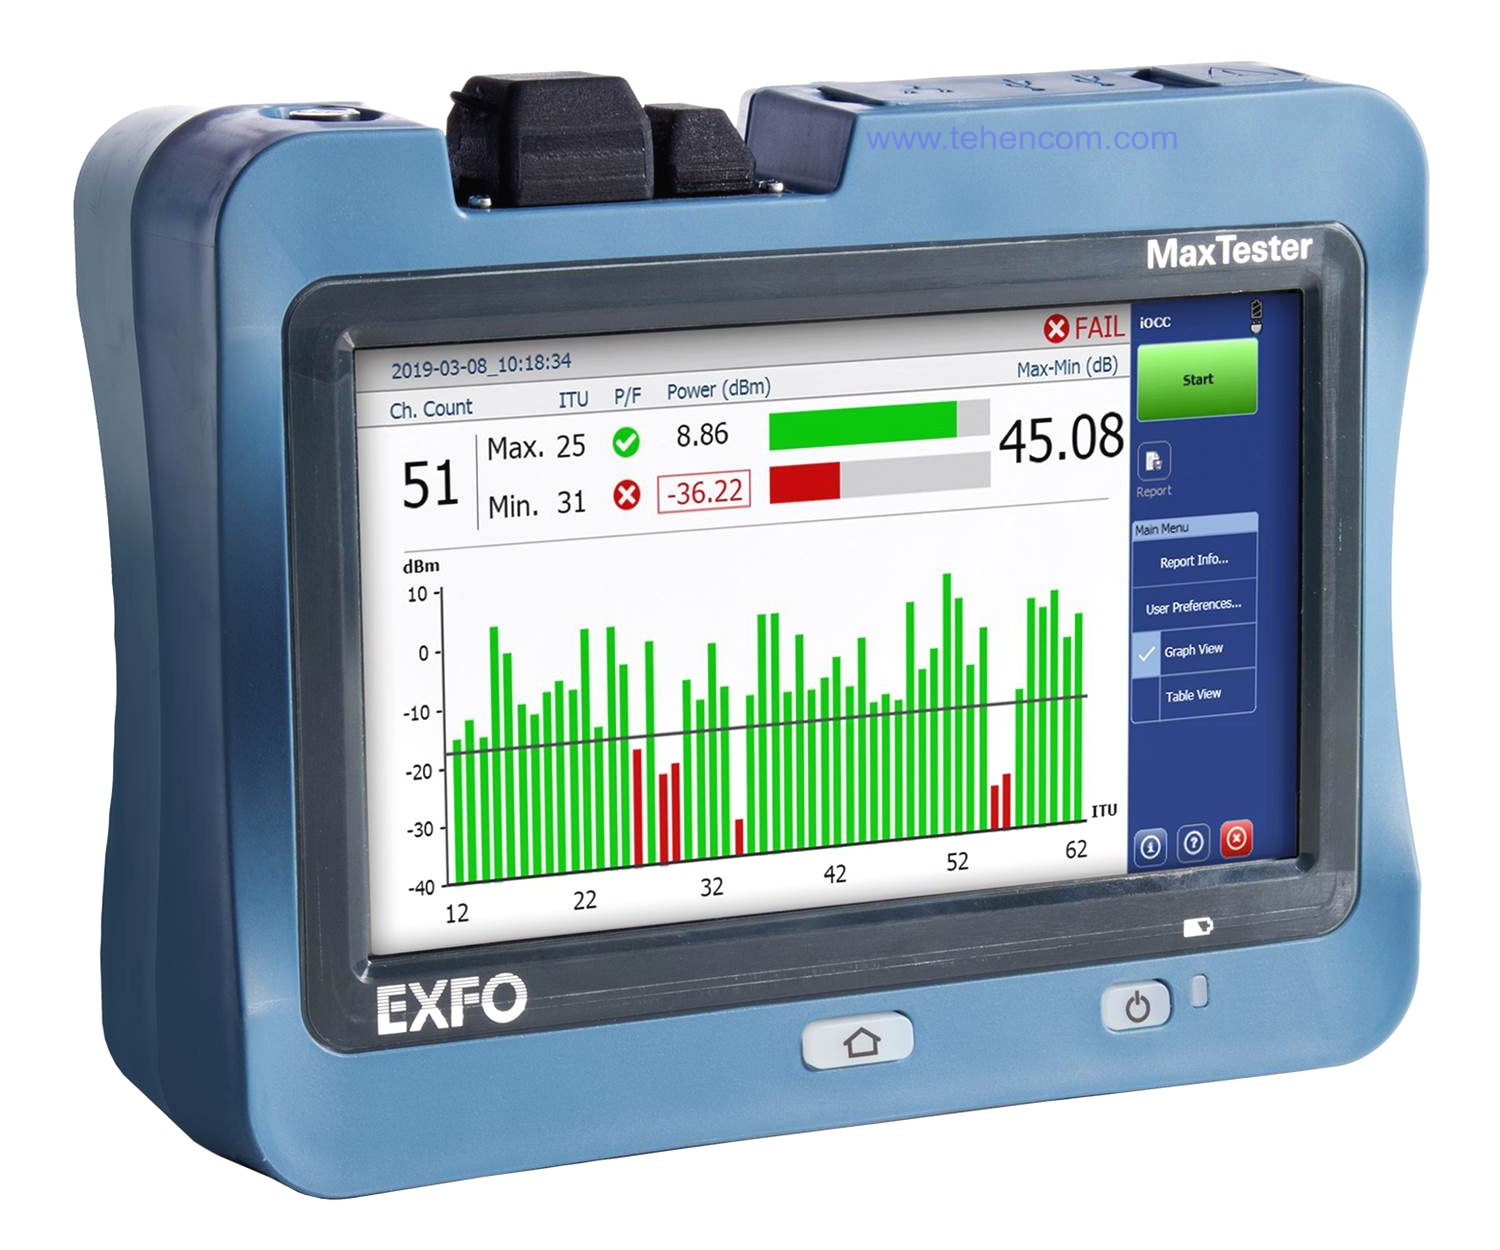 EXFO MaxTester MAX-5205 analyzer for DWDM networks with 100 GHz channel spacing, complies with ITU-T G.692 recommendation (C-BAND, channels 12 to 62).